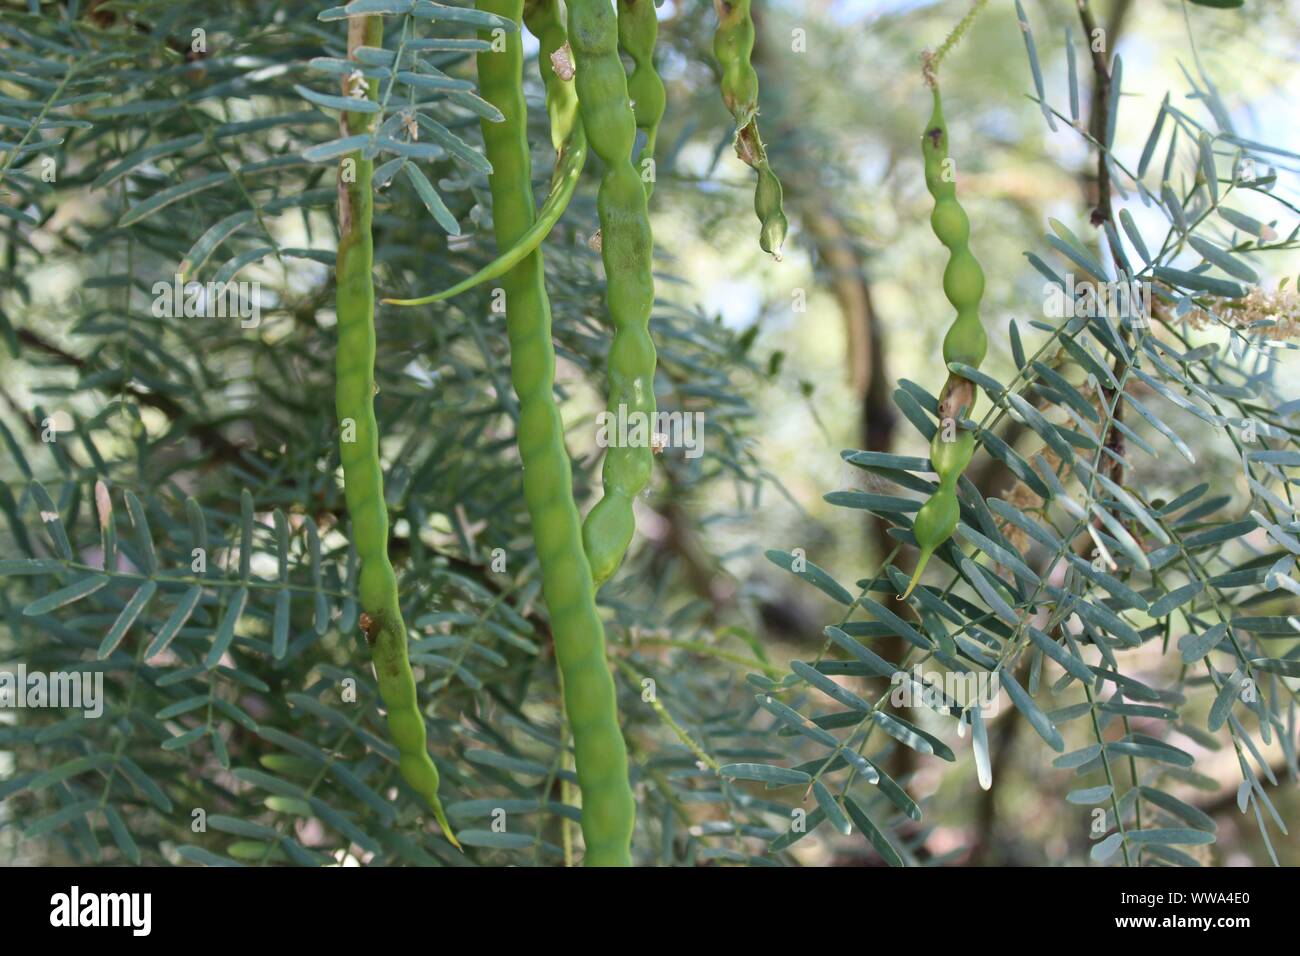 In Big Morongo Canyon Preserve grows a plant botanically classified as Prosopis Glandulosa, and commonly as Honey Mesquite. Stock Photo